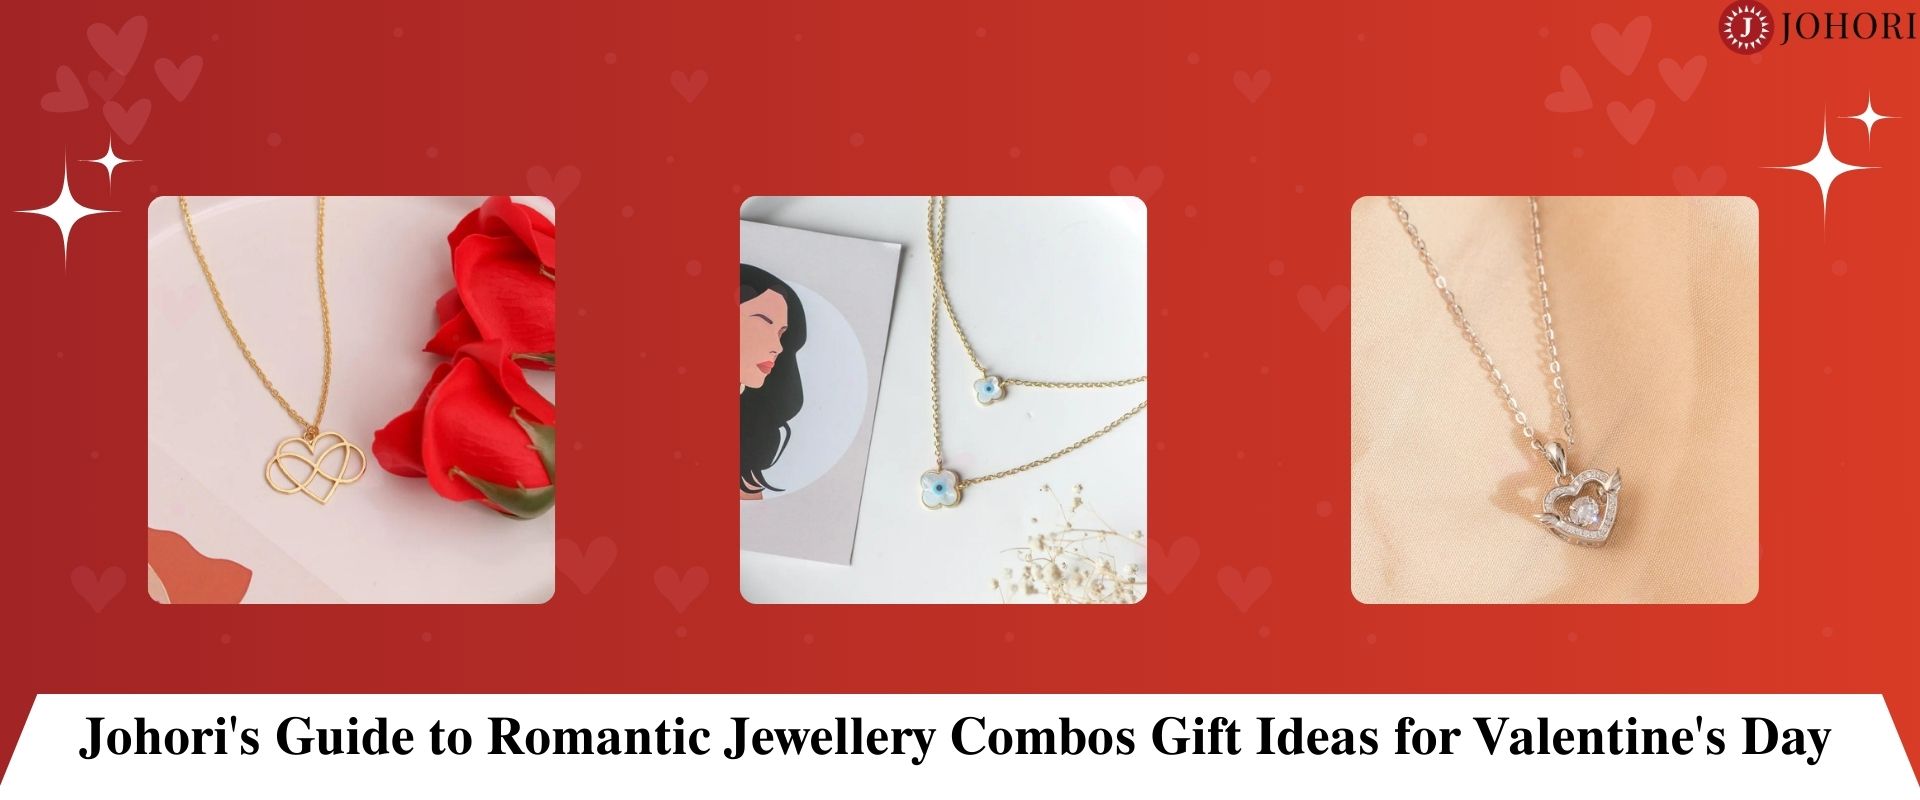 Johori's Guide to Romantic Jewellery Combos Gift Ideas for Valentine's Day